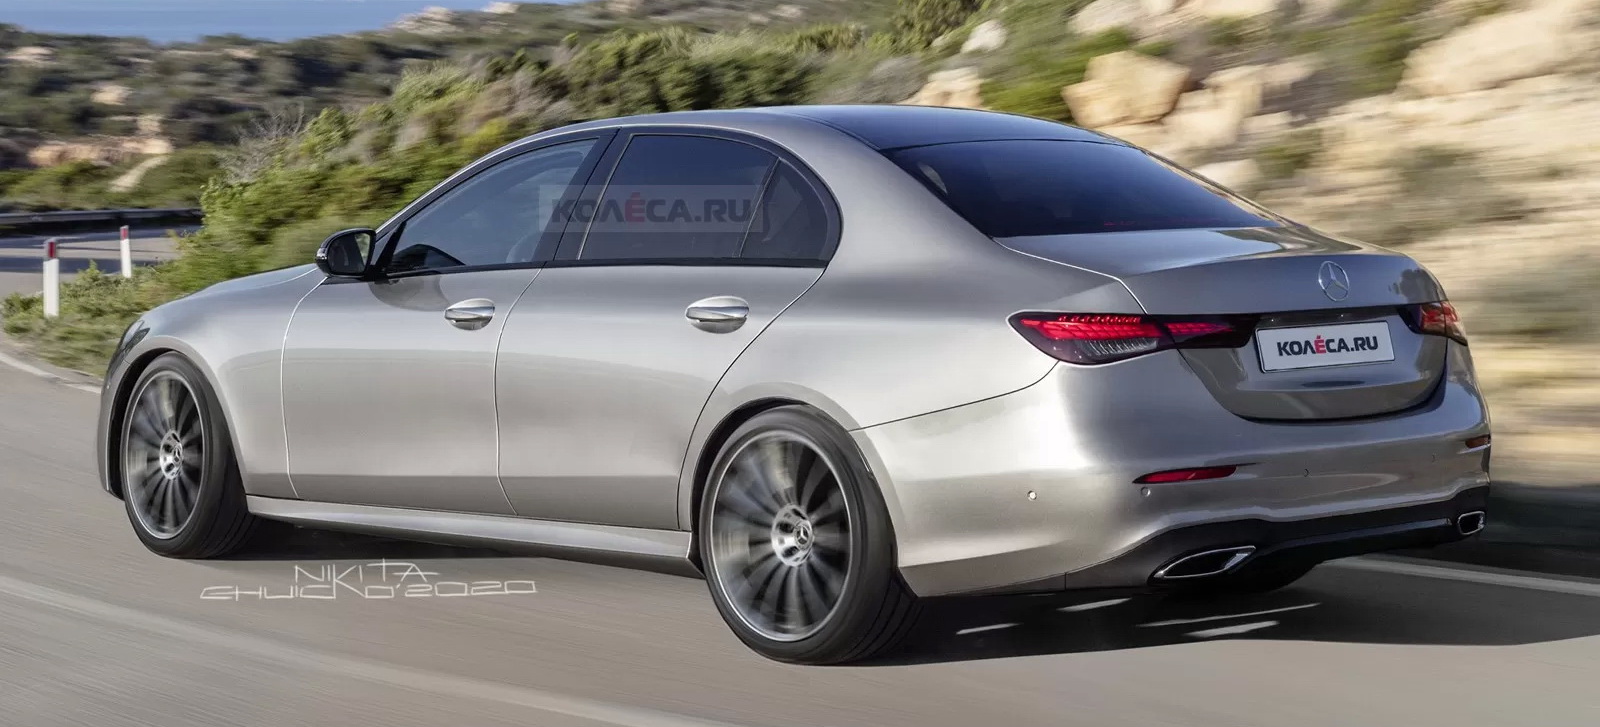 Meet The New 21 Mercedes C Class Through A Speculative Render Carscoops